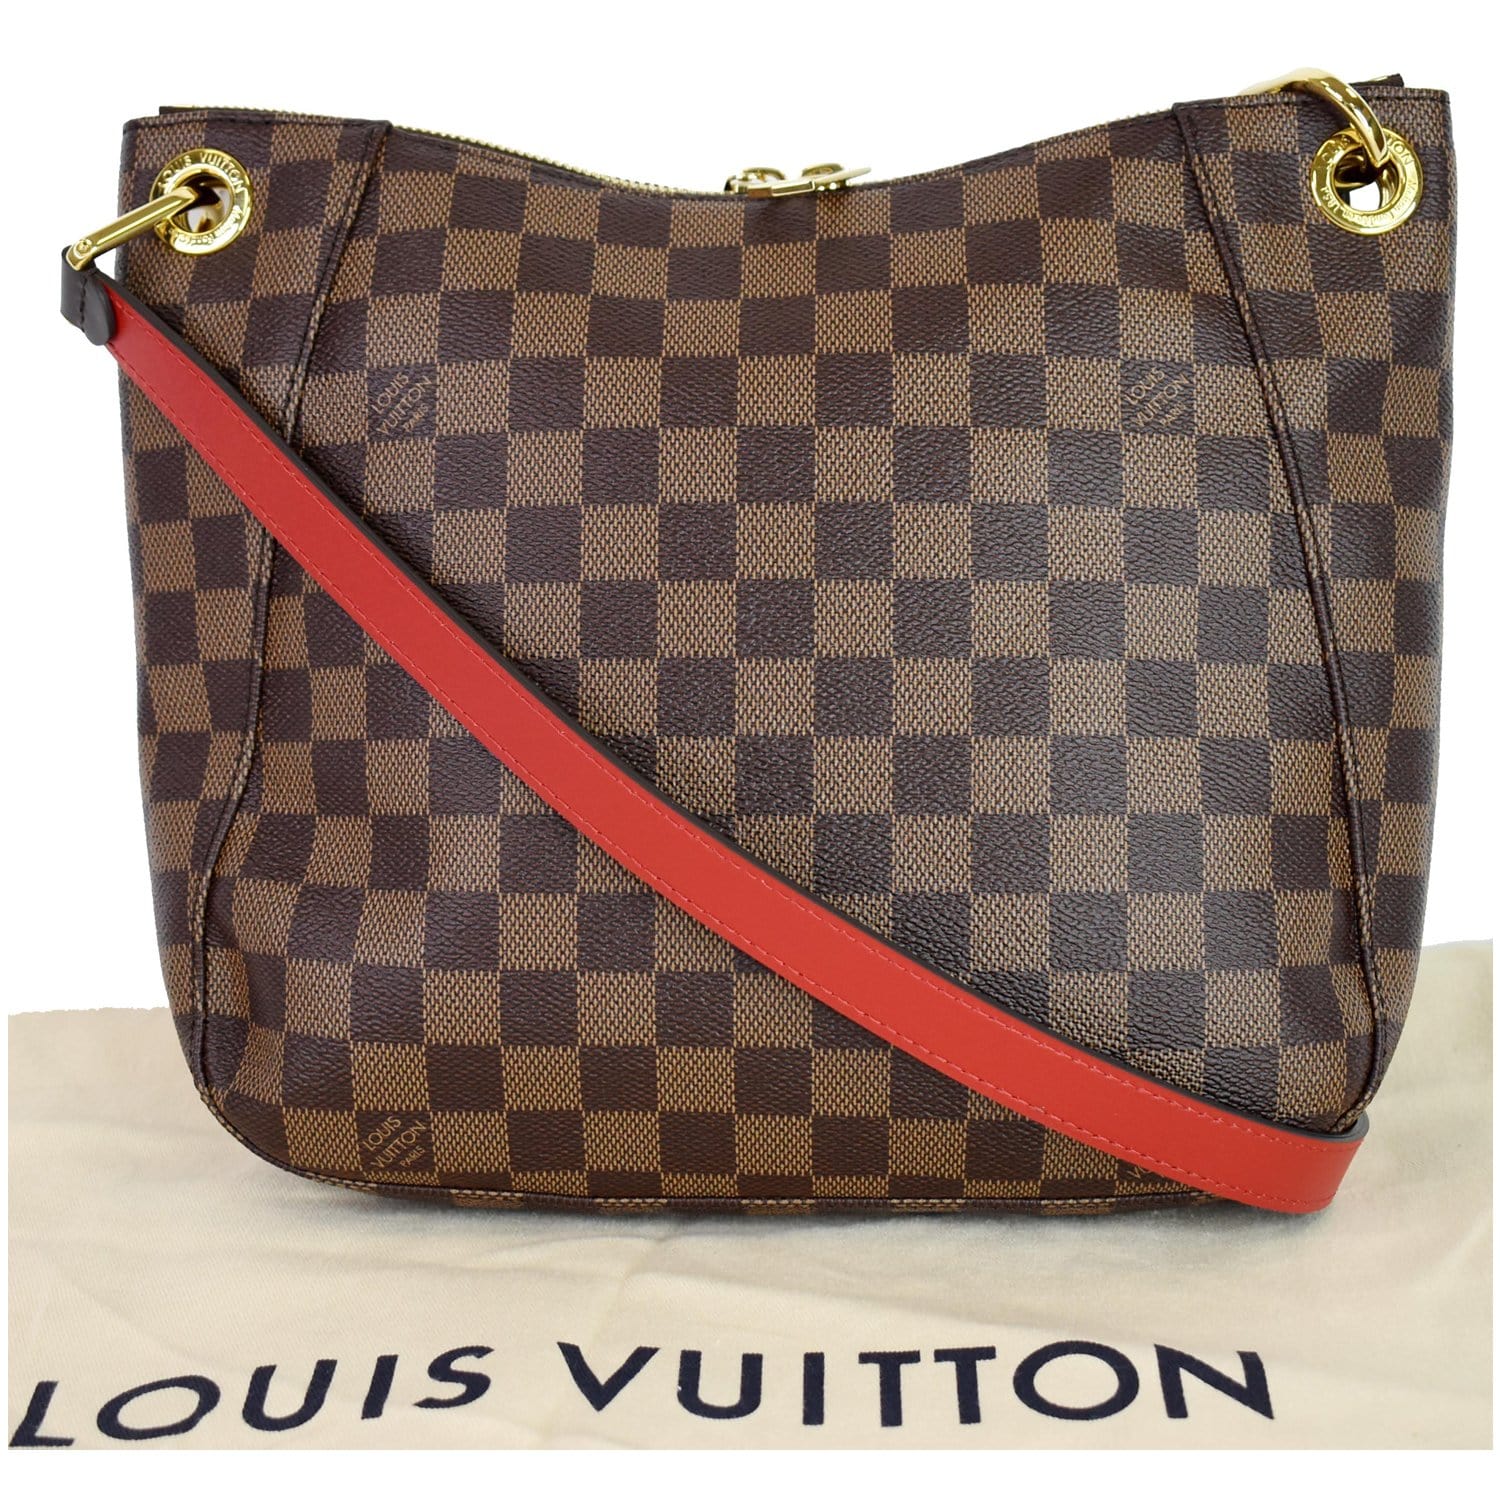 Preowned Louis vuitton South Bank Besace Damier Ebene